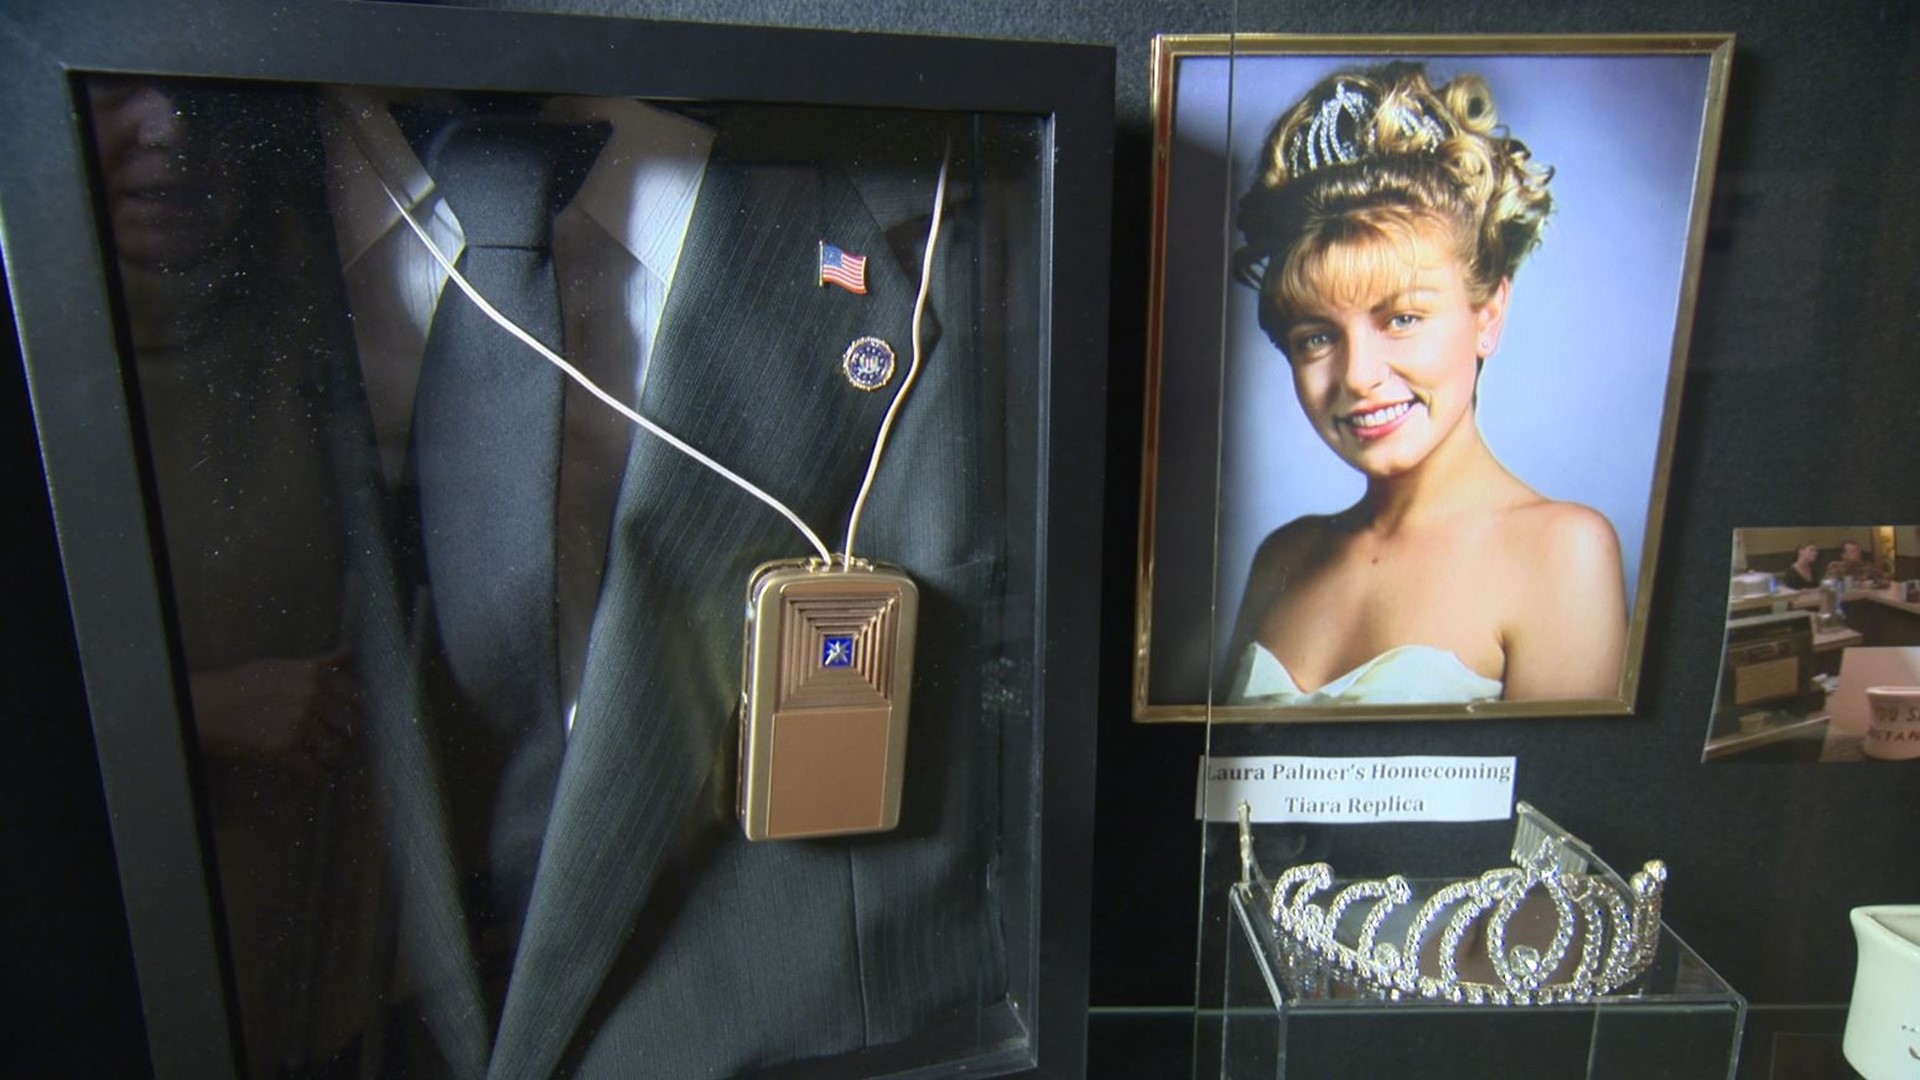 The exhibition includes everything from TV show props to fan-made art. #k5evening